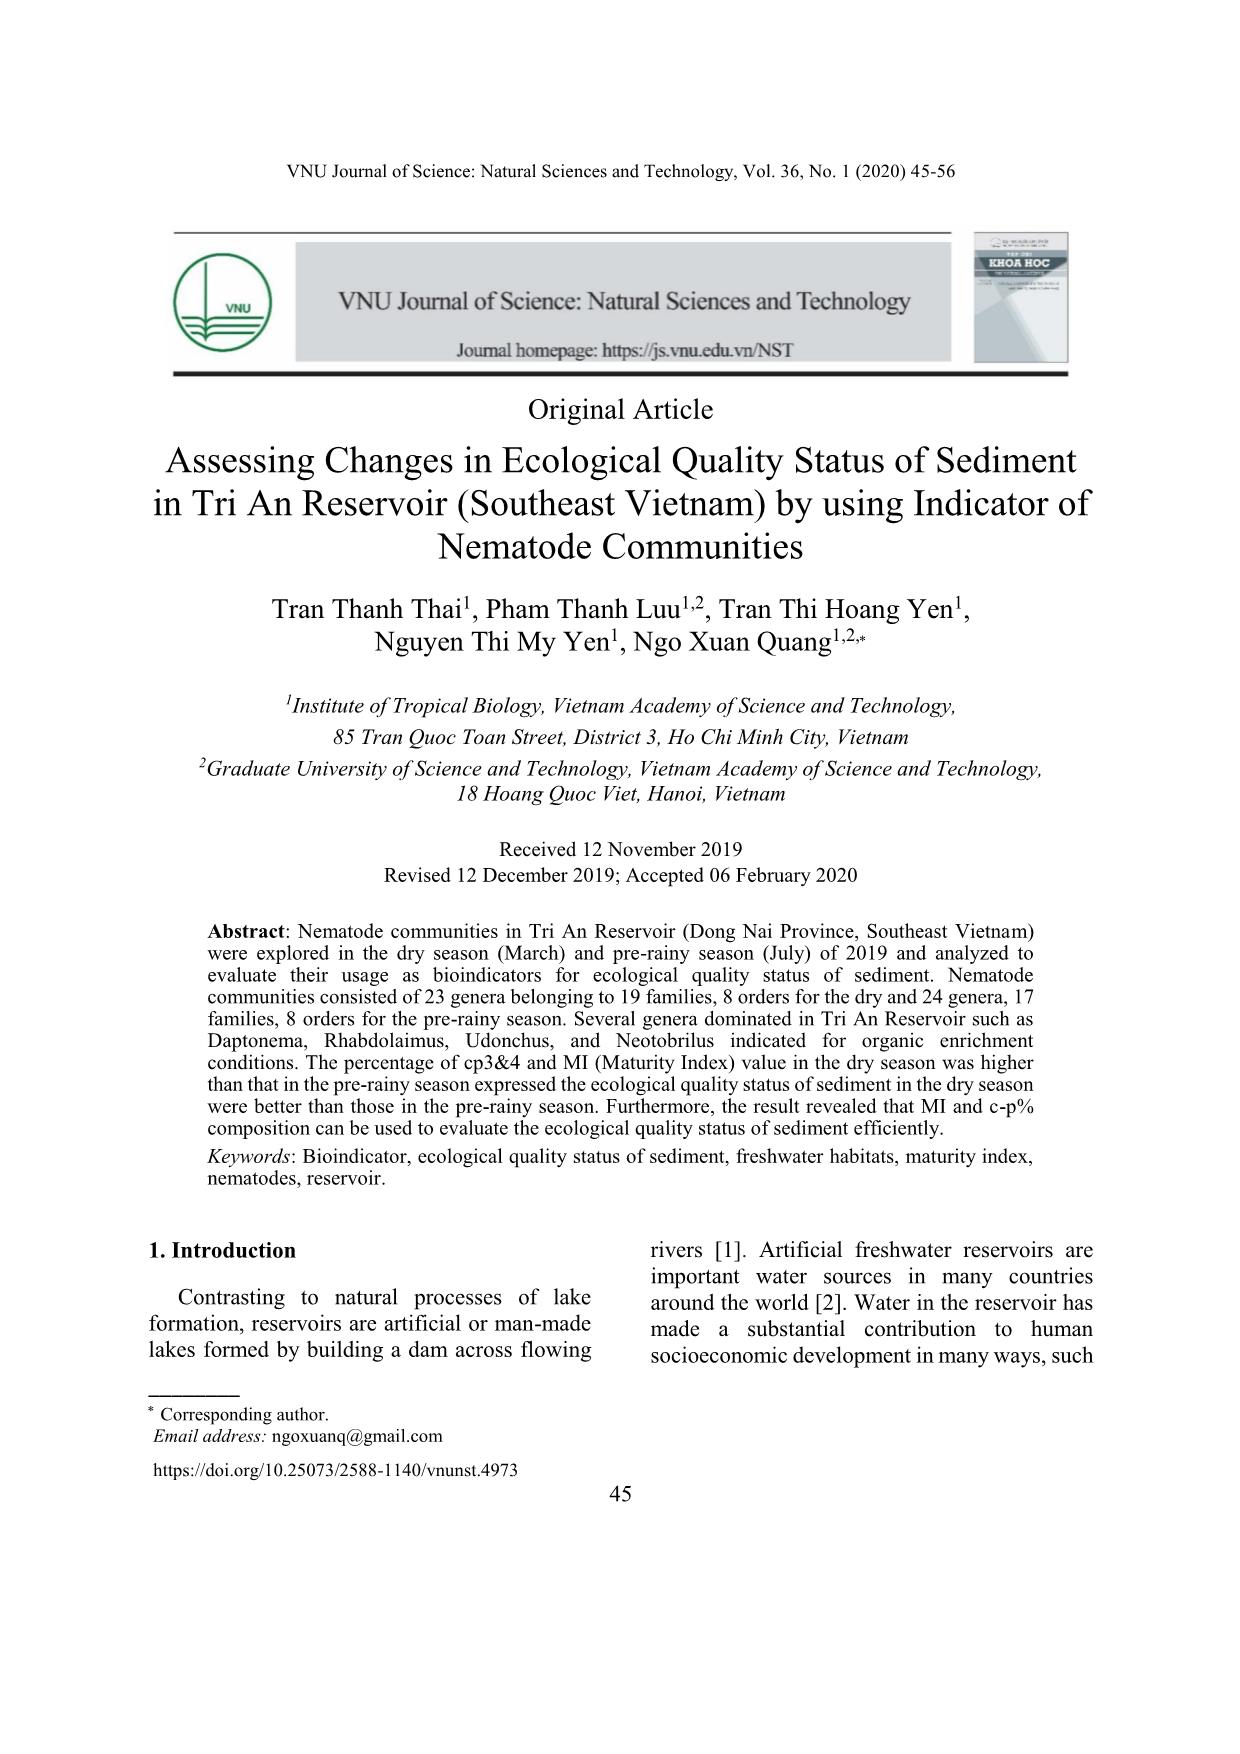 Assessing changes in ecological quality status of sediment in Tri An reservoir (Southeast Vietnam) by using indicator of nematode communities trang 1